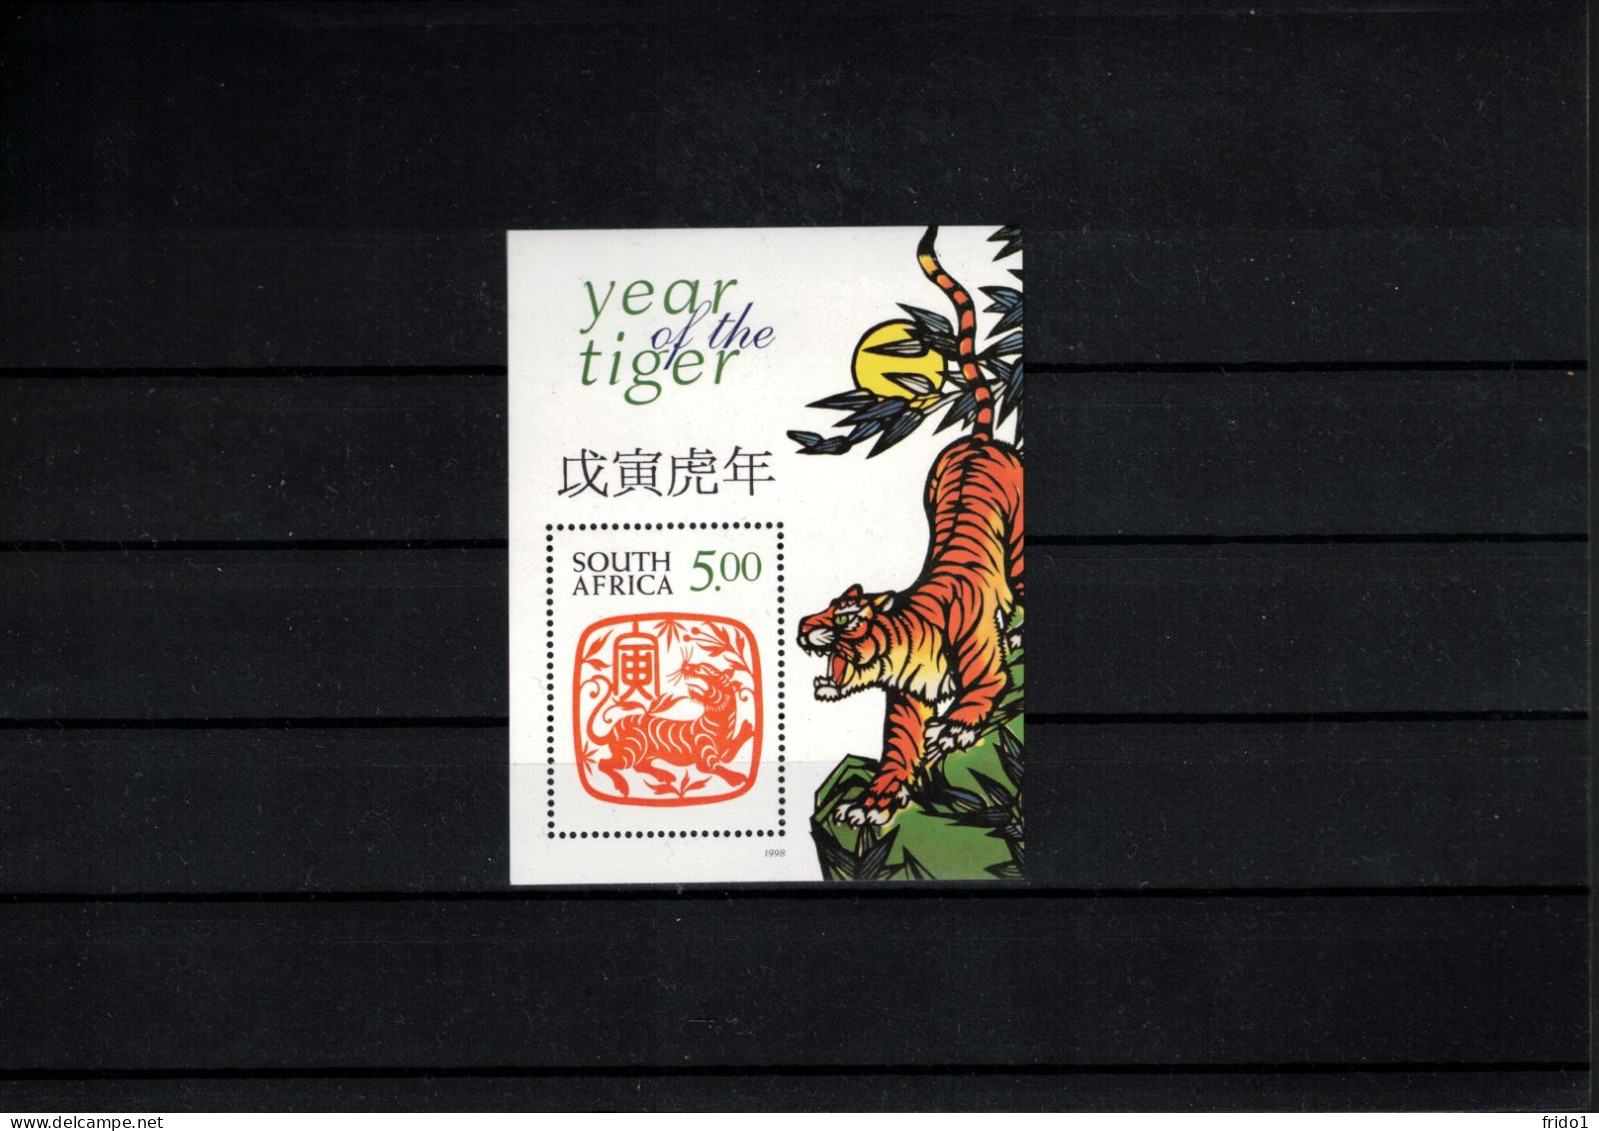 South Africa 1998 Year Of The Tiger Block Postfrisch / MNH - Año Nuevo Chino